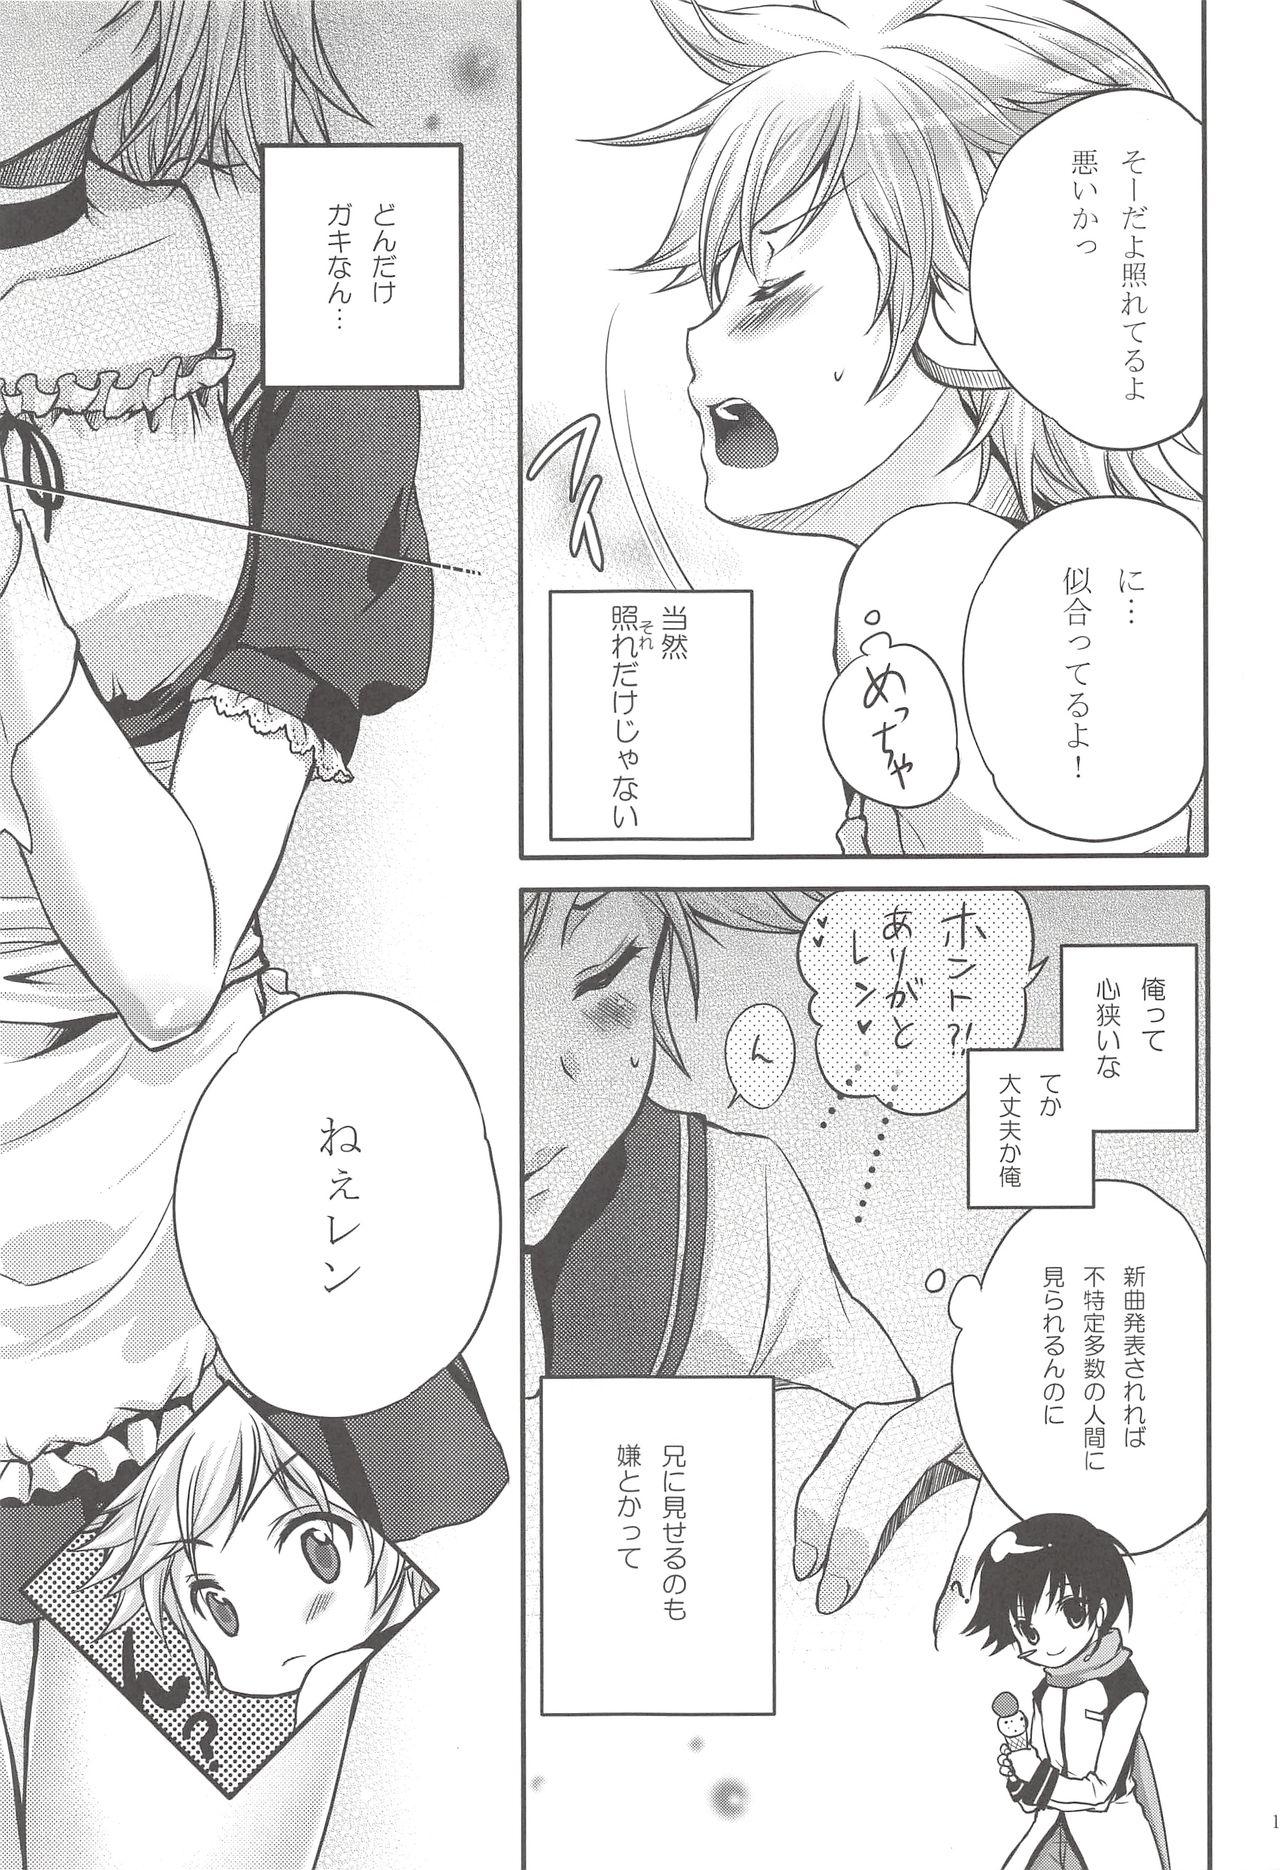 Realsex I serve domine - Vocaloid Swallowing - Page 12